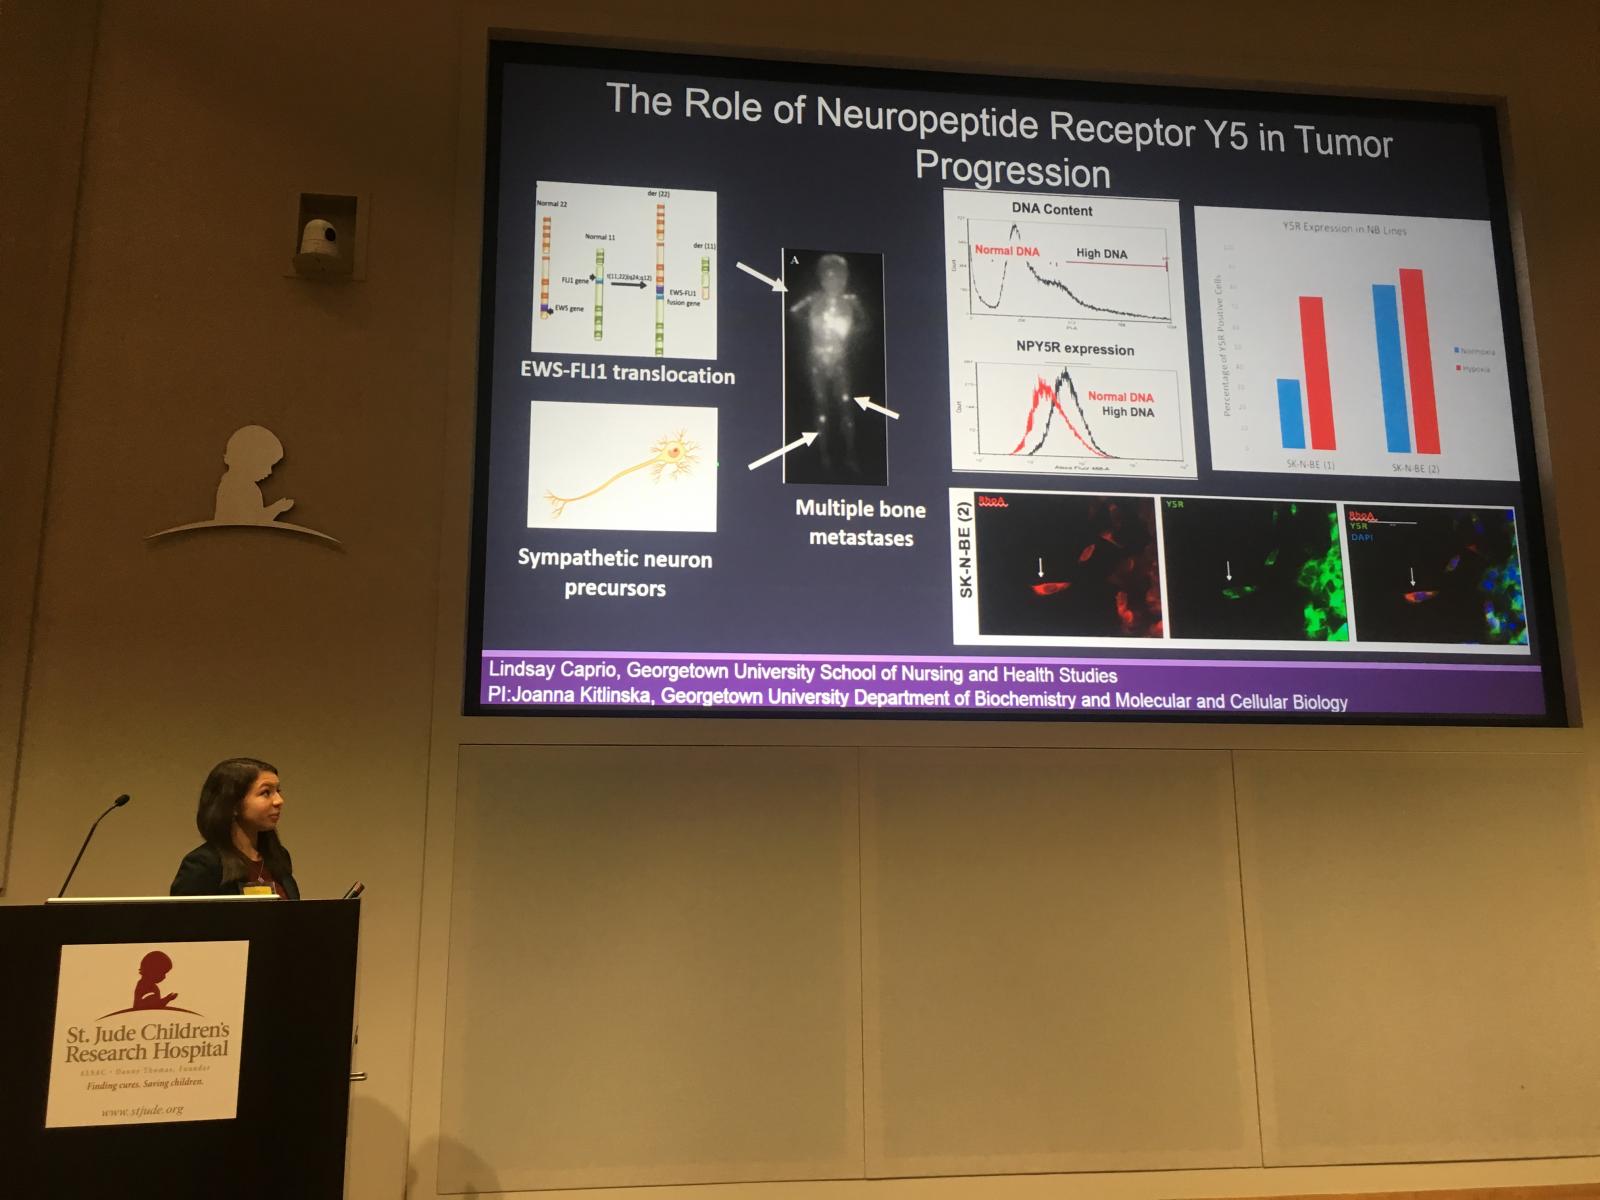 Lindsay Caprio at a podium with a slide projected on a screen next to her titled “The Role of Neuropeptide Receptor Y5 in Tumor Progression”